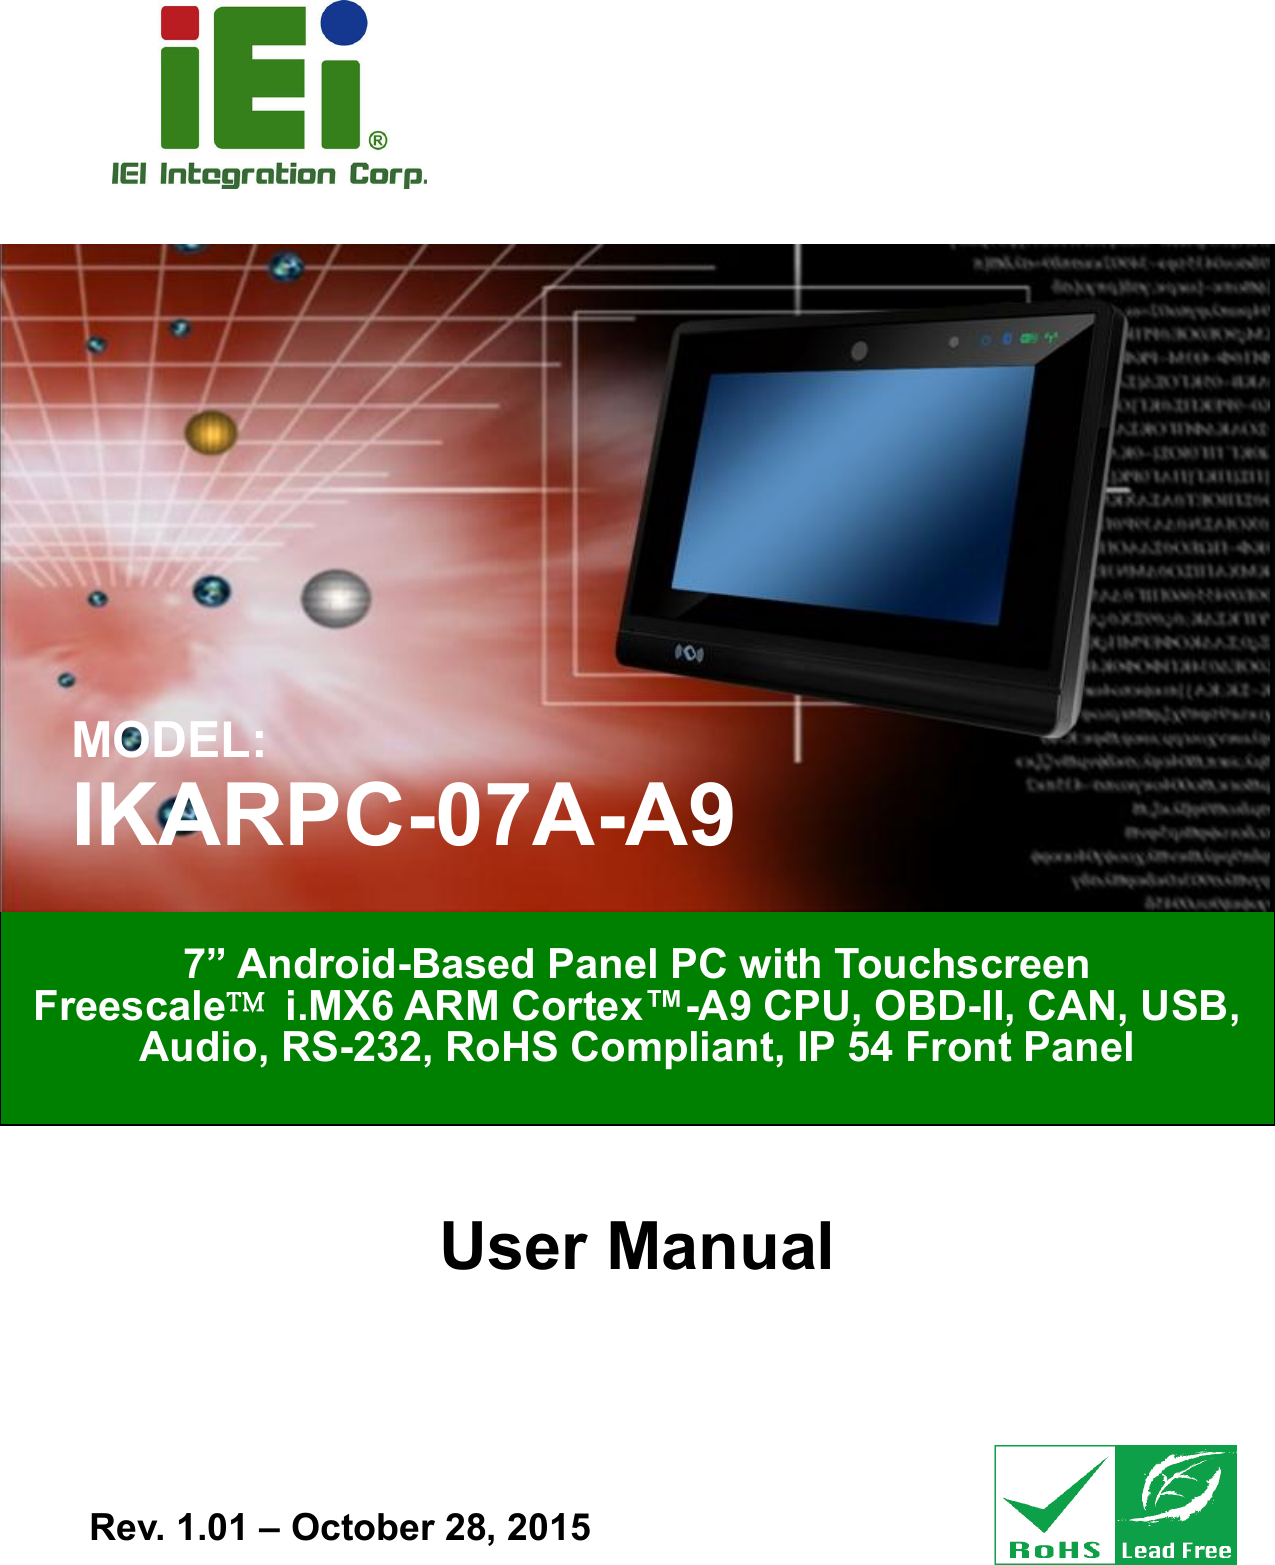   IKARPC-07A-A9 In-vehicle Panel PC  Page I User Manual  MODEL: IKARPC-07A-A9 7” Android-Based Panel PC with Touchscreen Freescale™ i.MX6 ARM Cortex™-A9 CPU, OBD-II, CAN, USB, Audio, RS-232, RoHS Compliant, IP 54 Front Panel Rev. 1.01 – October 28, 2015 